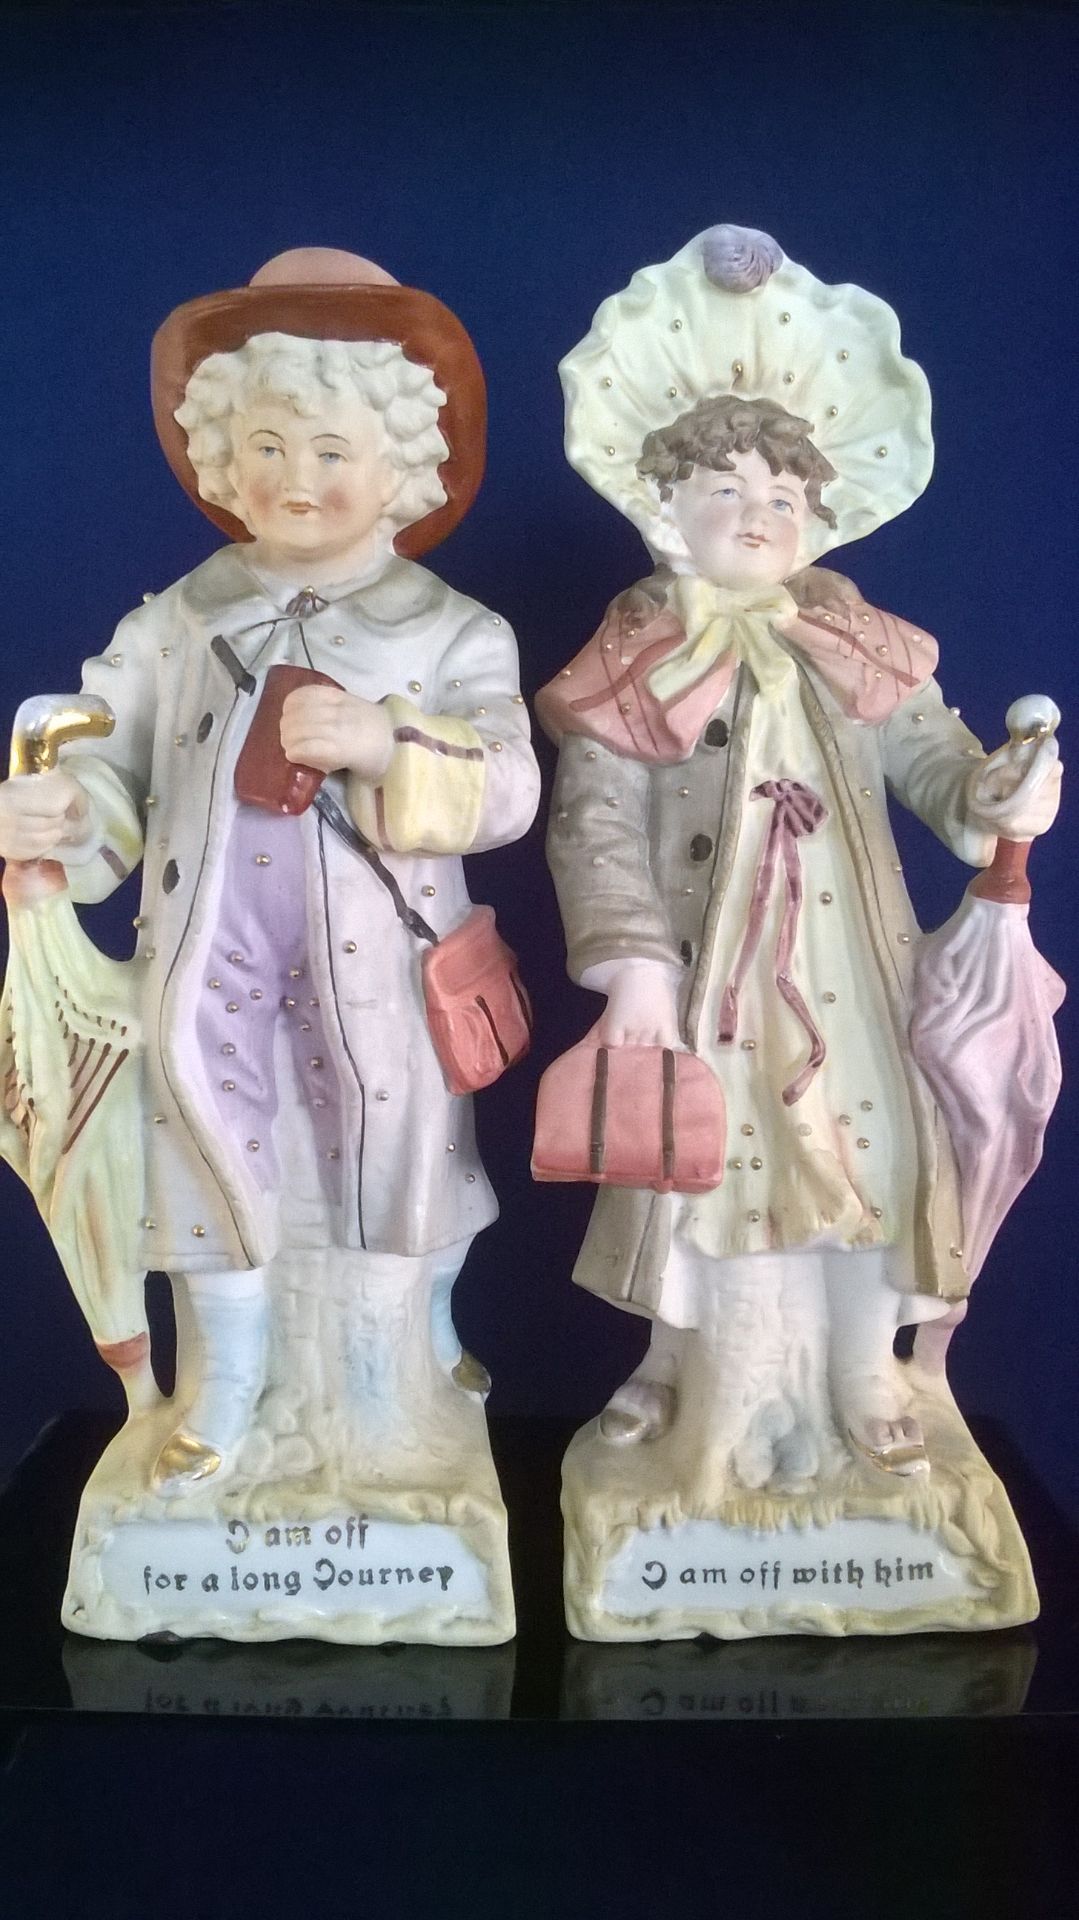 PAIR OF DELILGHTFUL LARGE BISQUE CHINA FAIRINGS "I AM OFF FOR A LONG JOURNEY" and "I AM OFF WITH